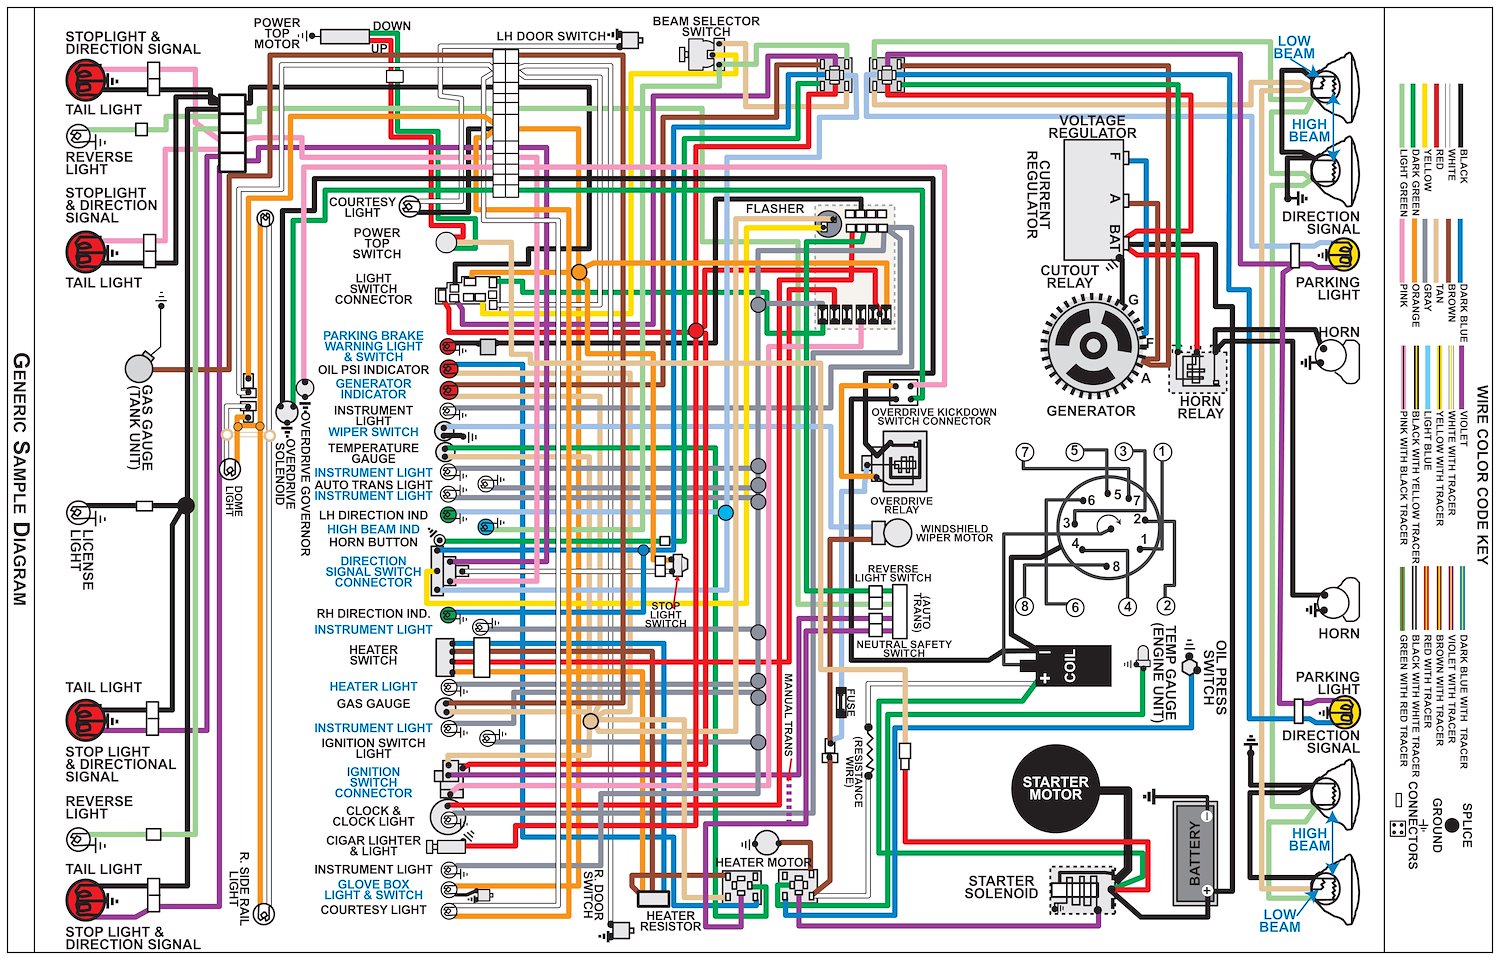 Wiring Diagram for 1973 Dodge D, W Series Trucks, 11 in x 17 in., Laminated